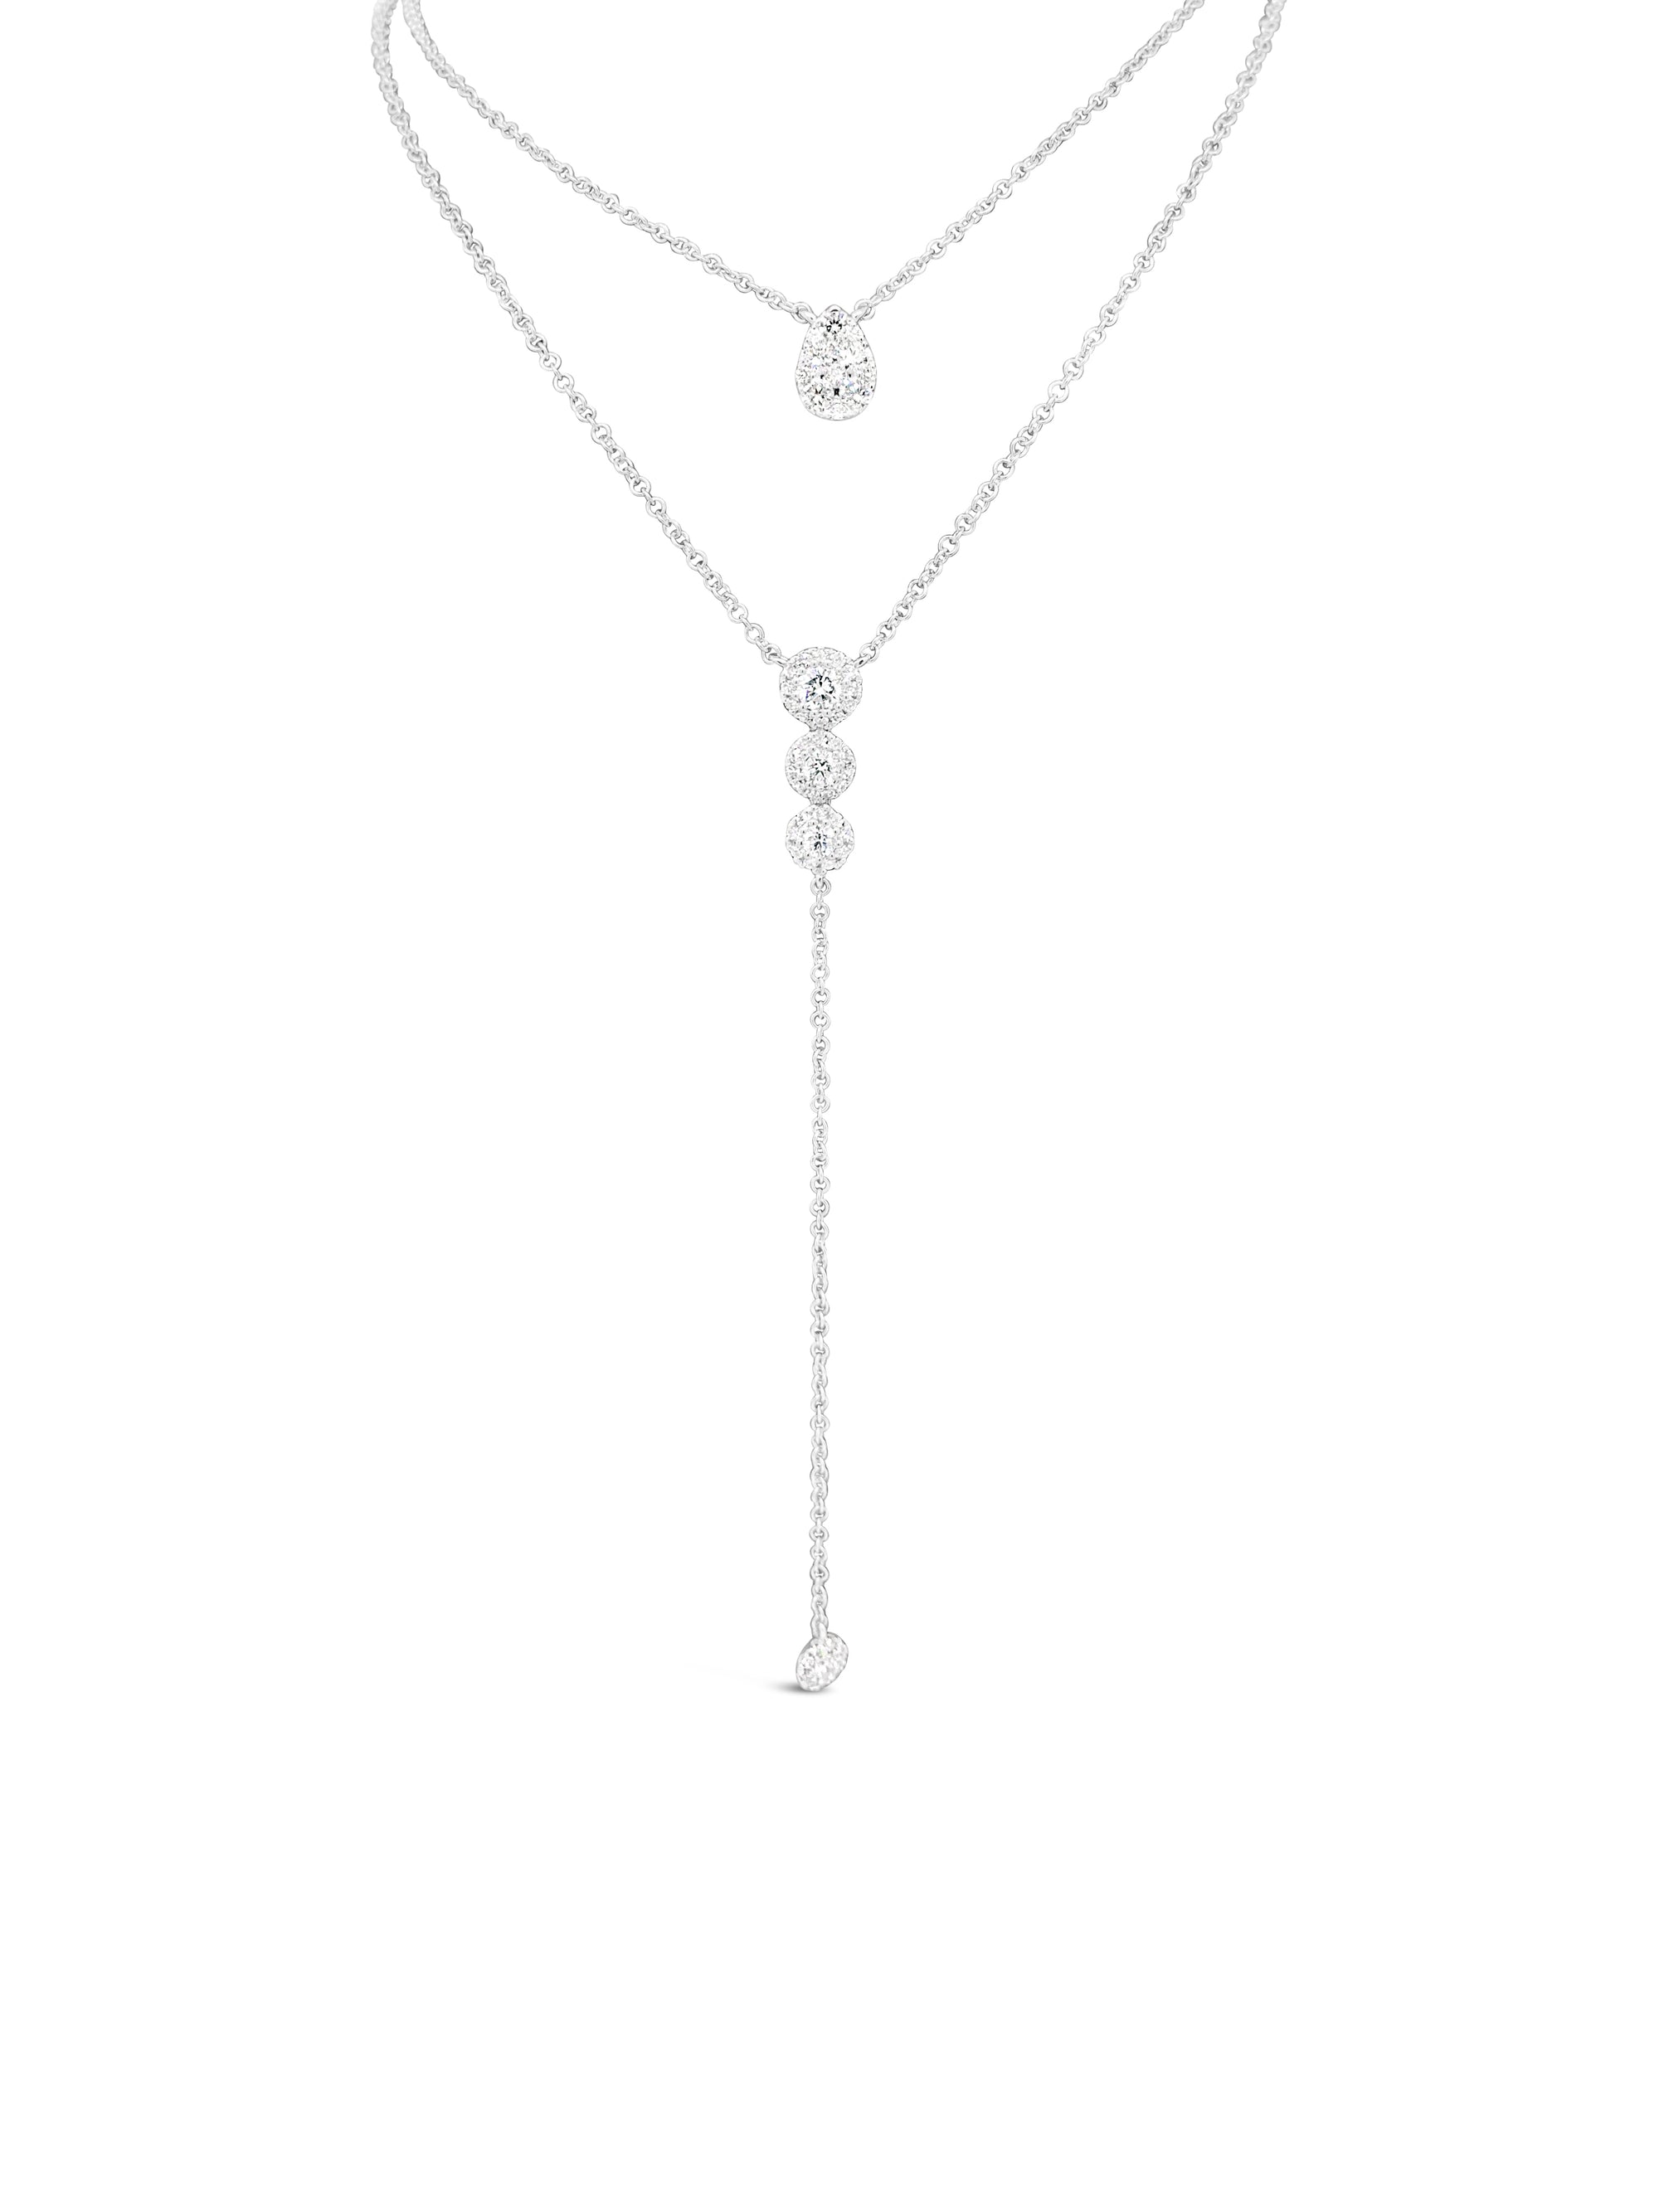 Diamond Teardrop Cluster Necklace  -14K gold weighing 1.40 grams  -12 round diamonds totaling 0.19 carats 